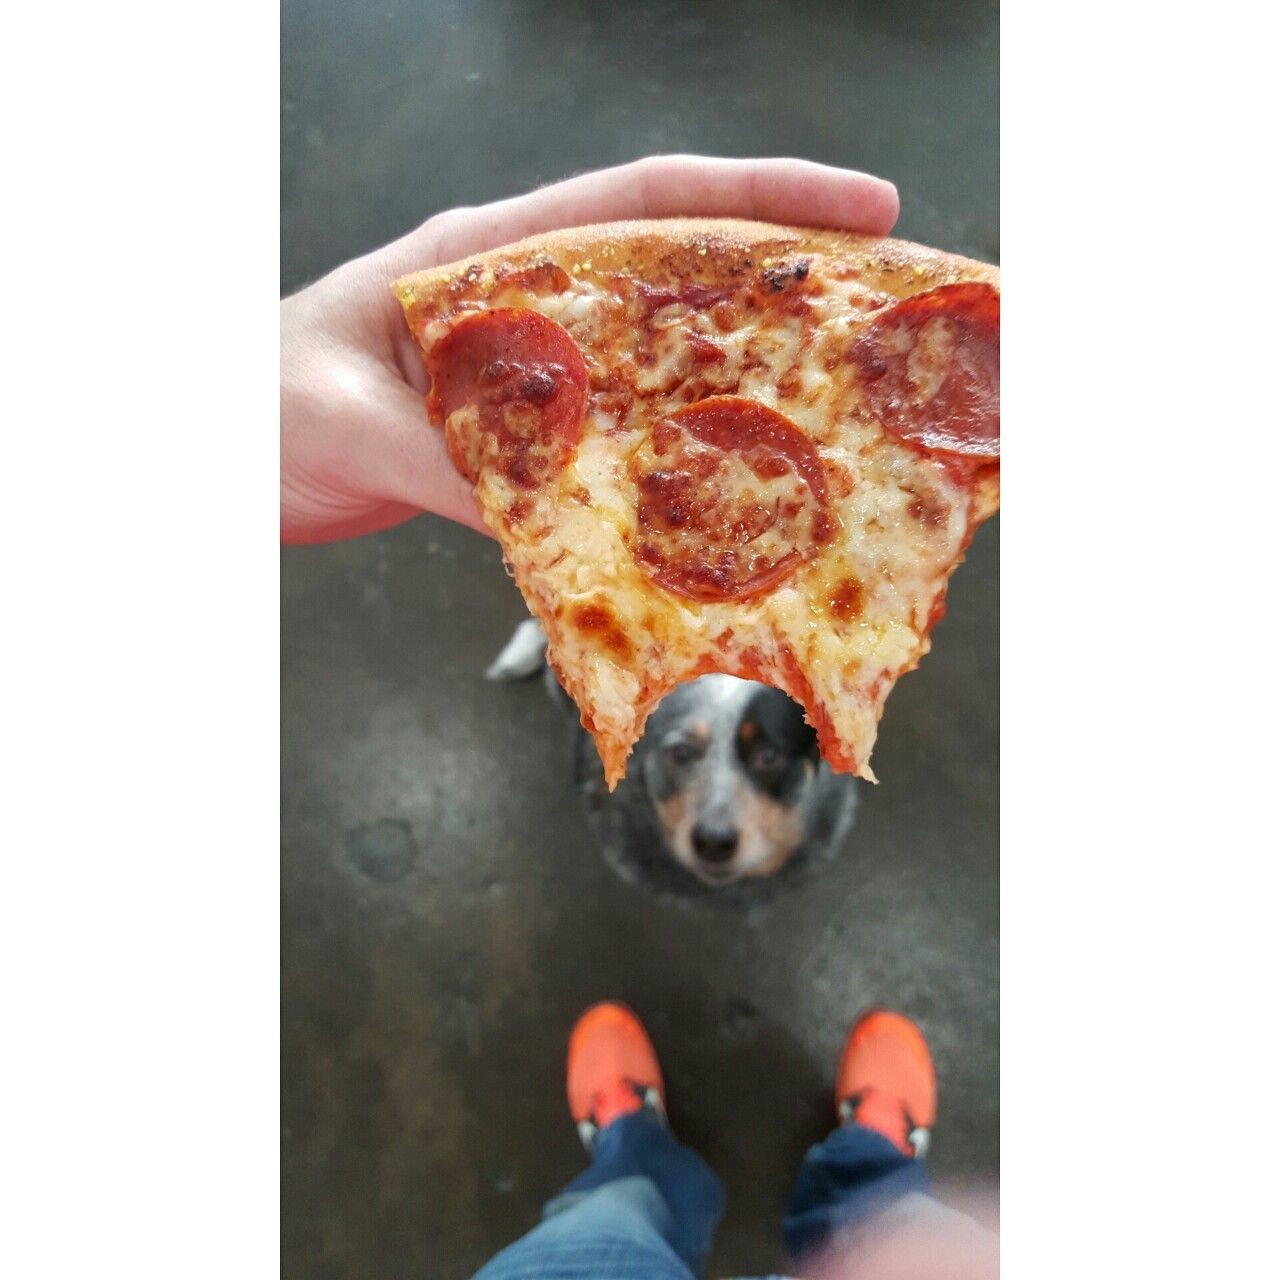 Some see a slice of pizza. Some see a begging dog. I see a dog wearing a pizza hat.